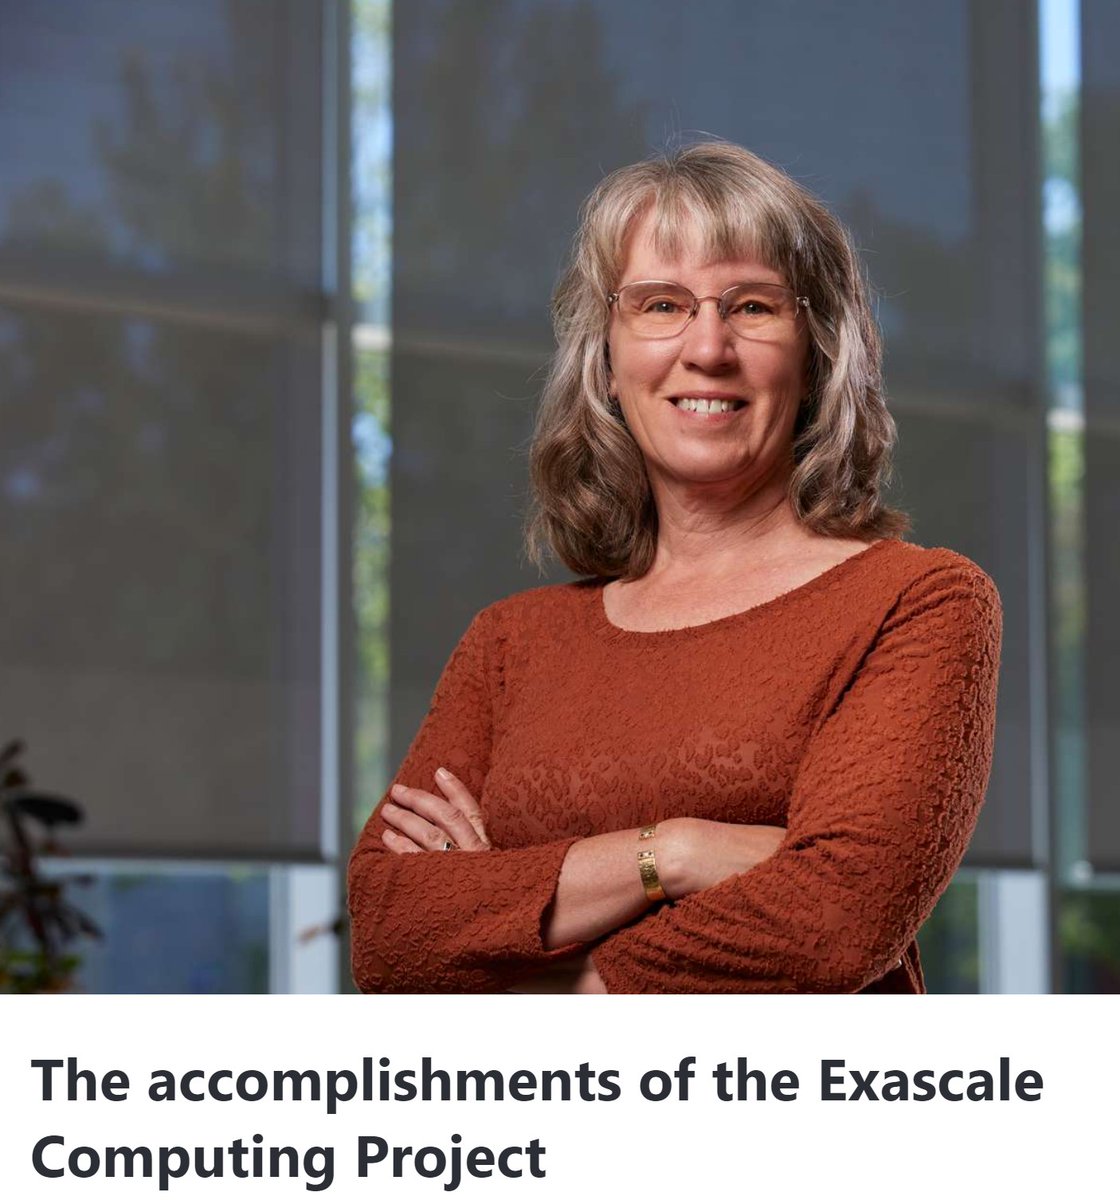 SIAM Webinar: The accomplishments of the Exascale Computing Project (@exascaleproject) by Dr. Lori A. Diachin @Livermore_Lab Wed May 22 at 11 AM EDT (5 PM CEST) Participation is free, but registration is required siag-sc.org/the-accomplish… #HPC